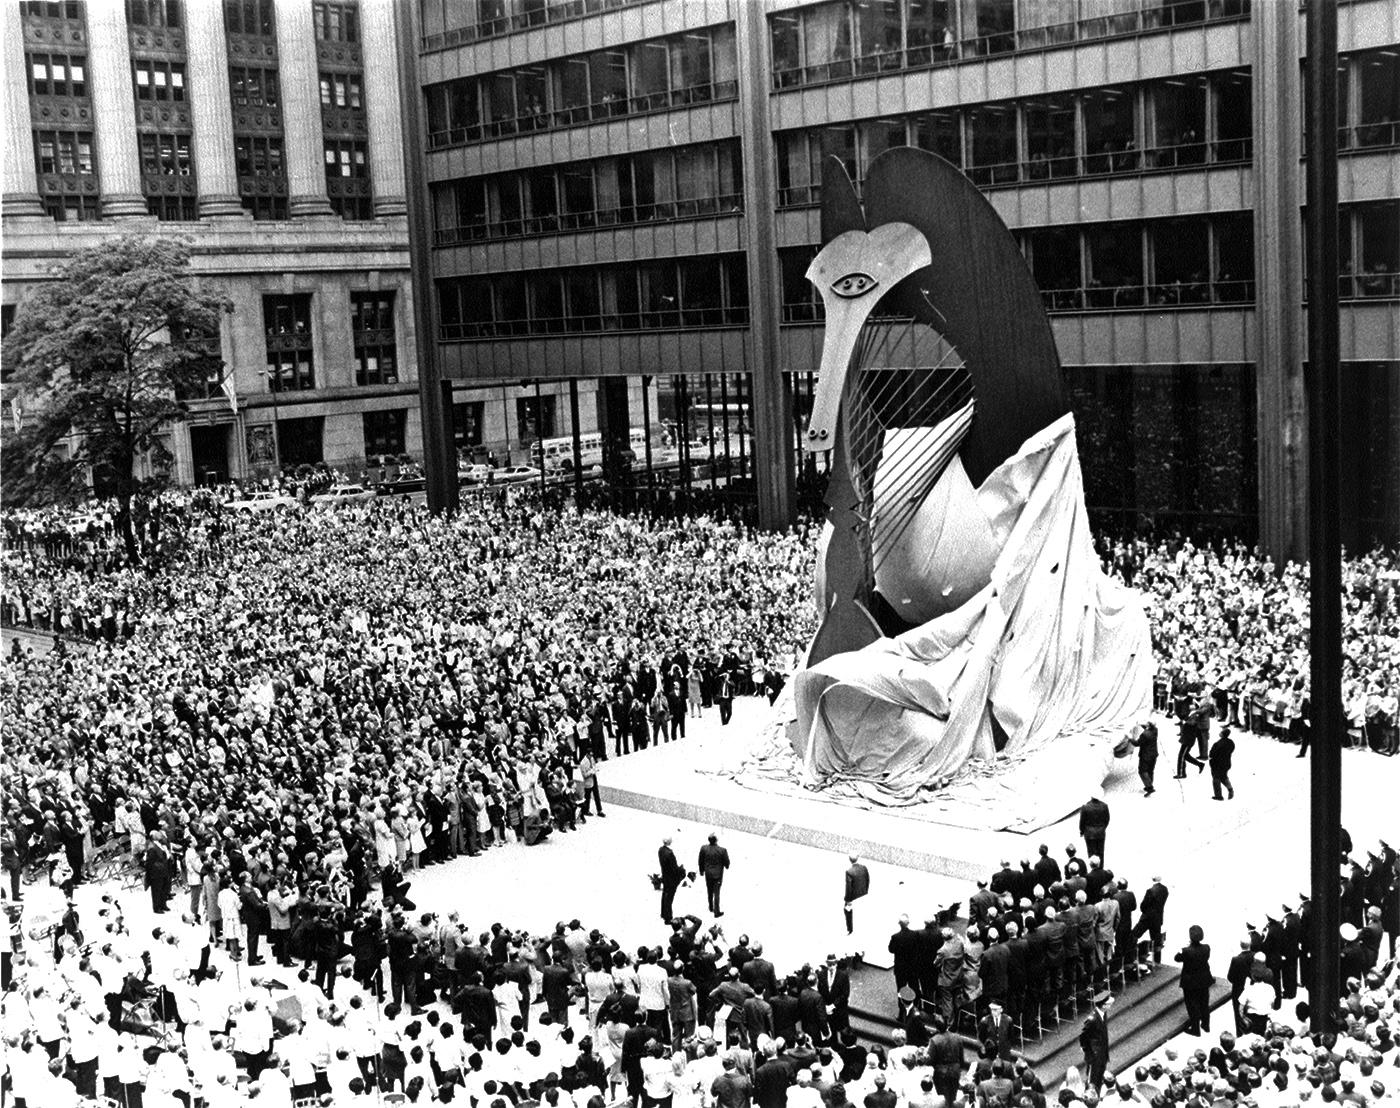 unveiling of the Chicago Picasso 